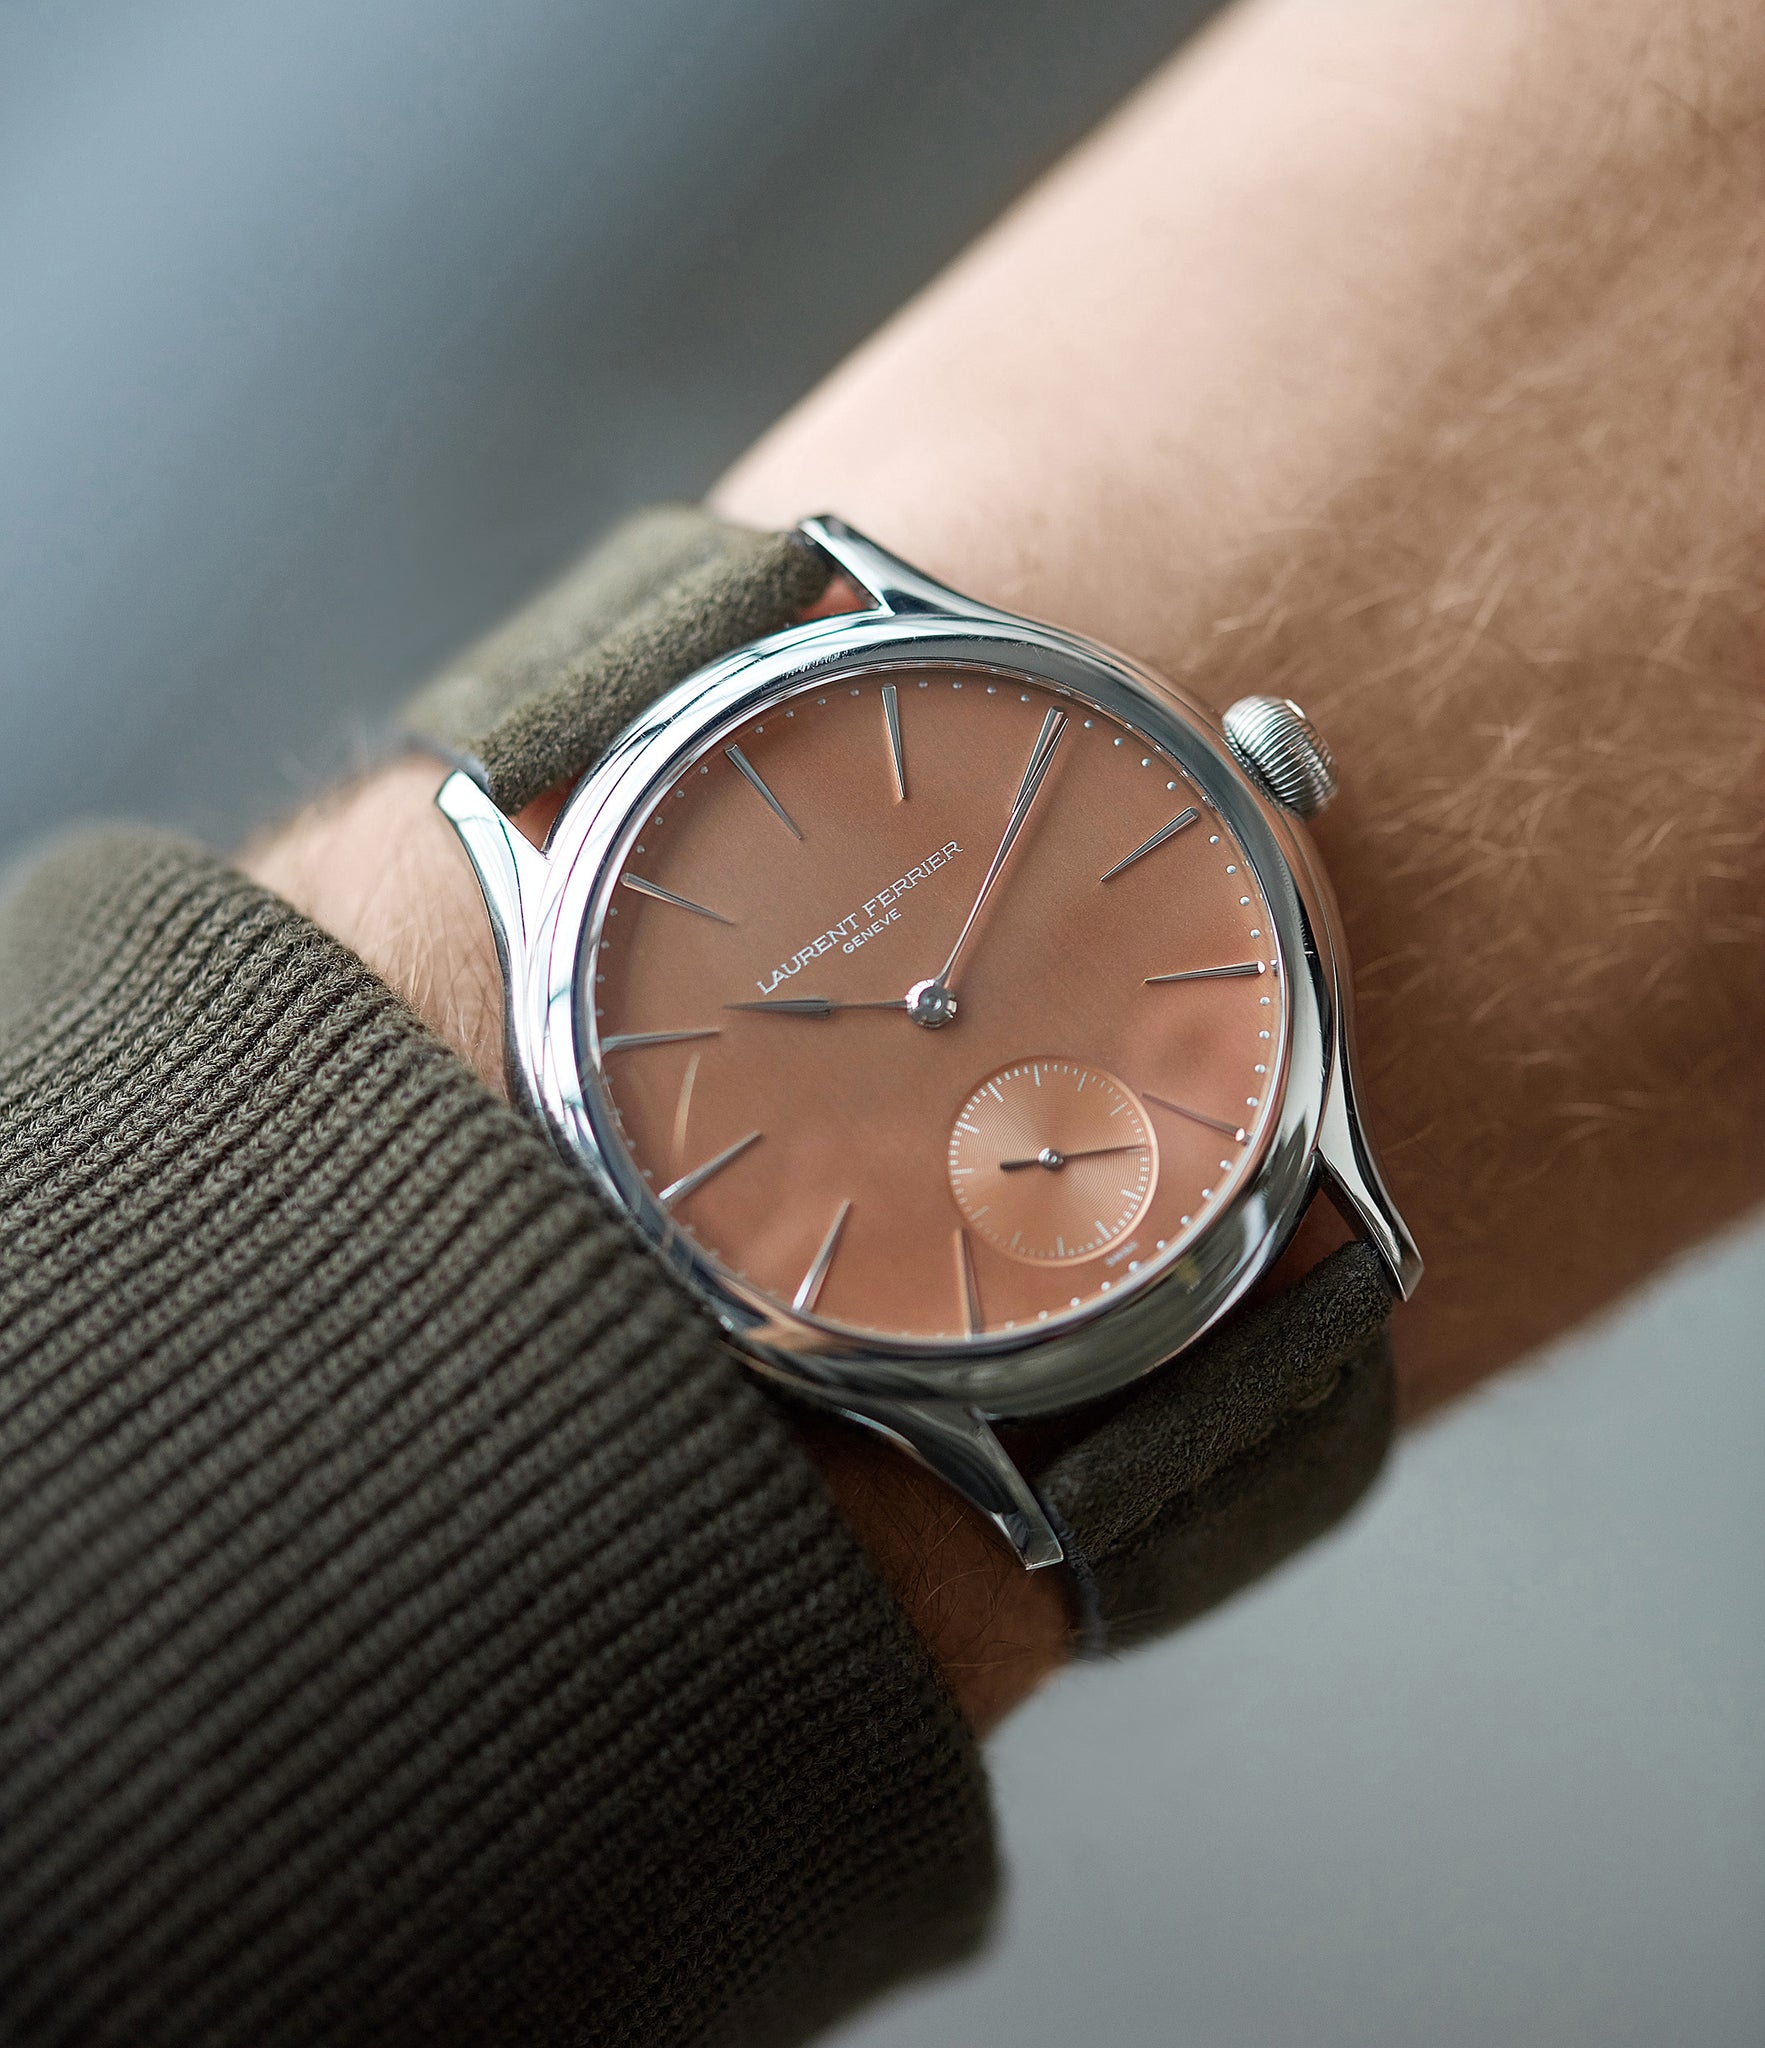 pink gold dial Laurent Ferrier Galet Micro-rotor FBN 229.01 steel rare watch for sale online at A Collected Man London approved re-seller of independent watchmakers